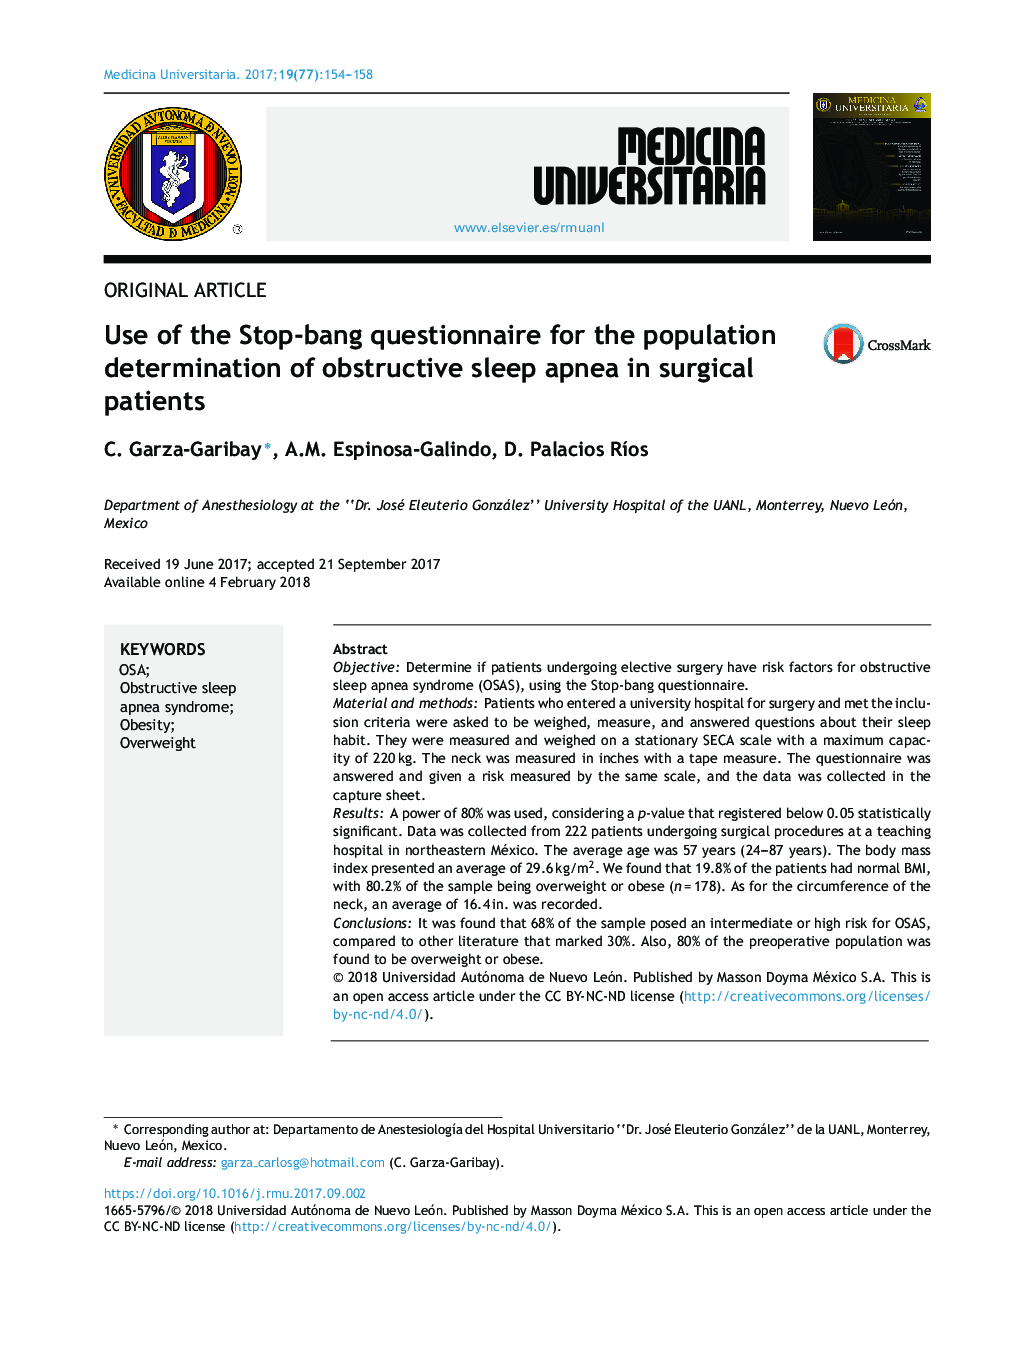 Use of the Stop-bang questionnaire for the population determination of obstructive sleep apnea in surgical patients